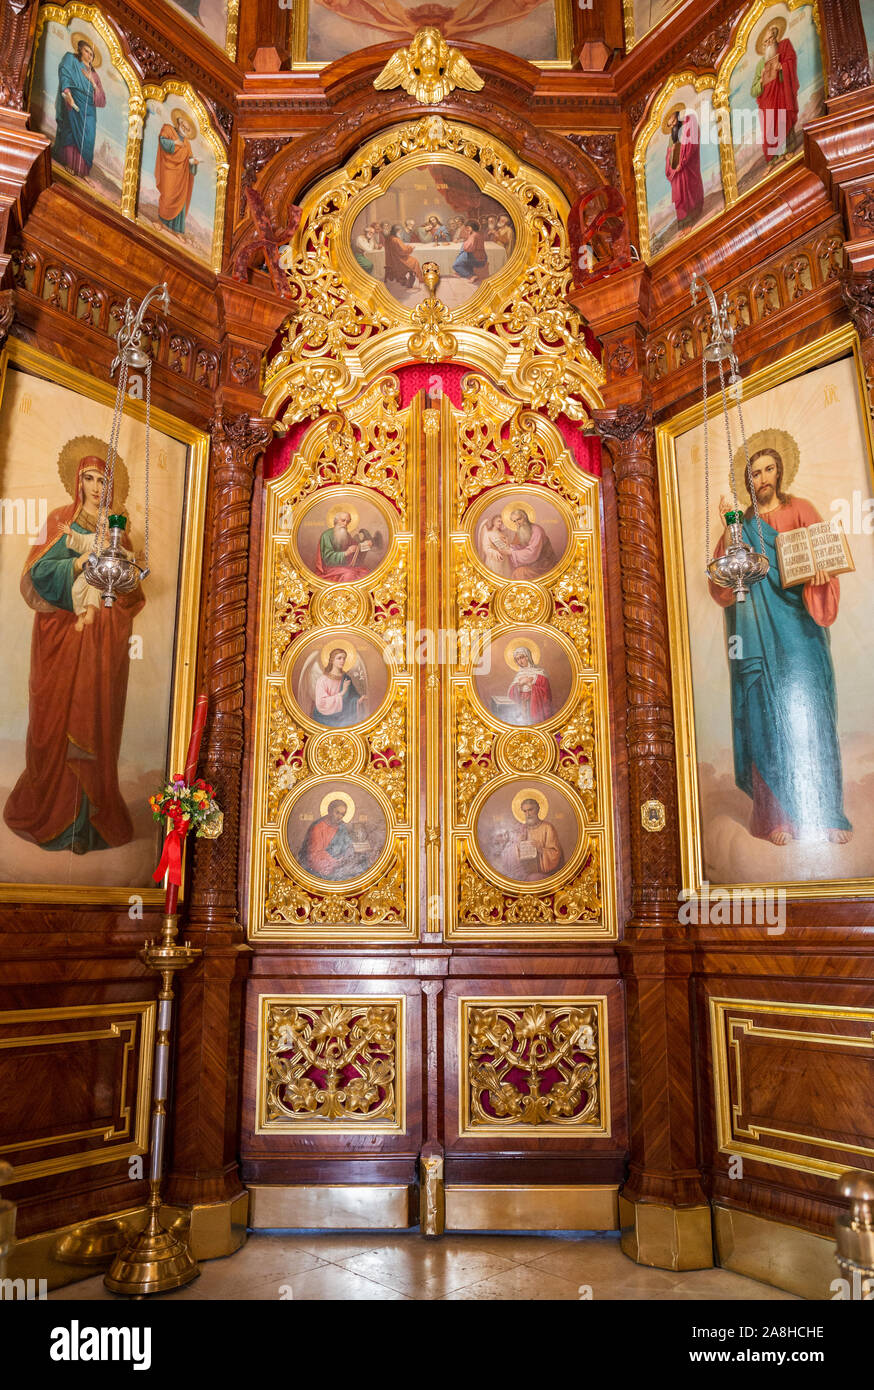 SERGIEV POSAD, MOSCOW REGION, RUSSIA - MAY 10, 2018: Trinity Lavra of St. Sergius, interior of the Church of the Descent of the Holy Spirit. Sanctuary Stock Photo